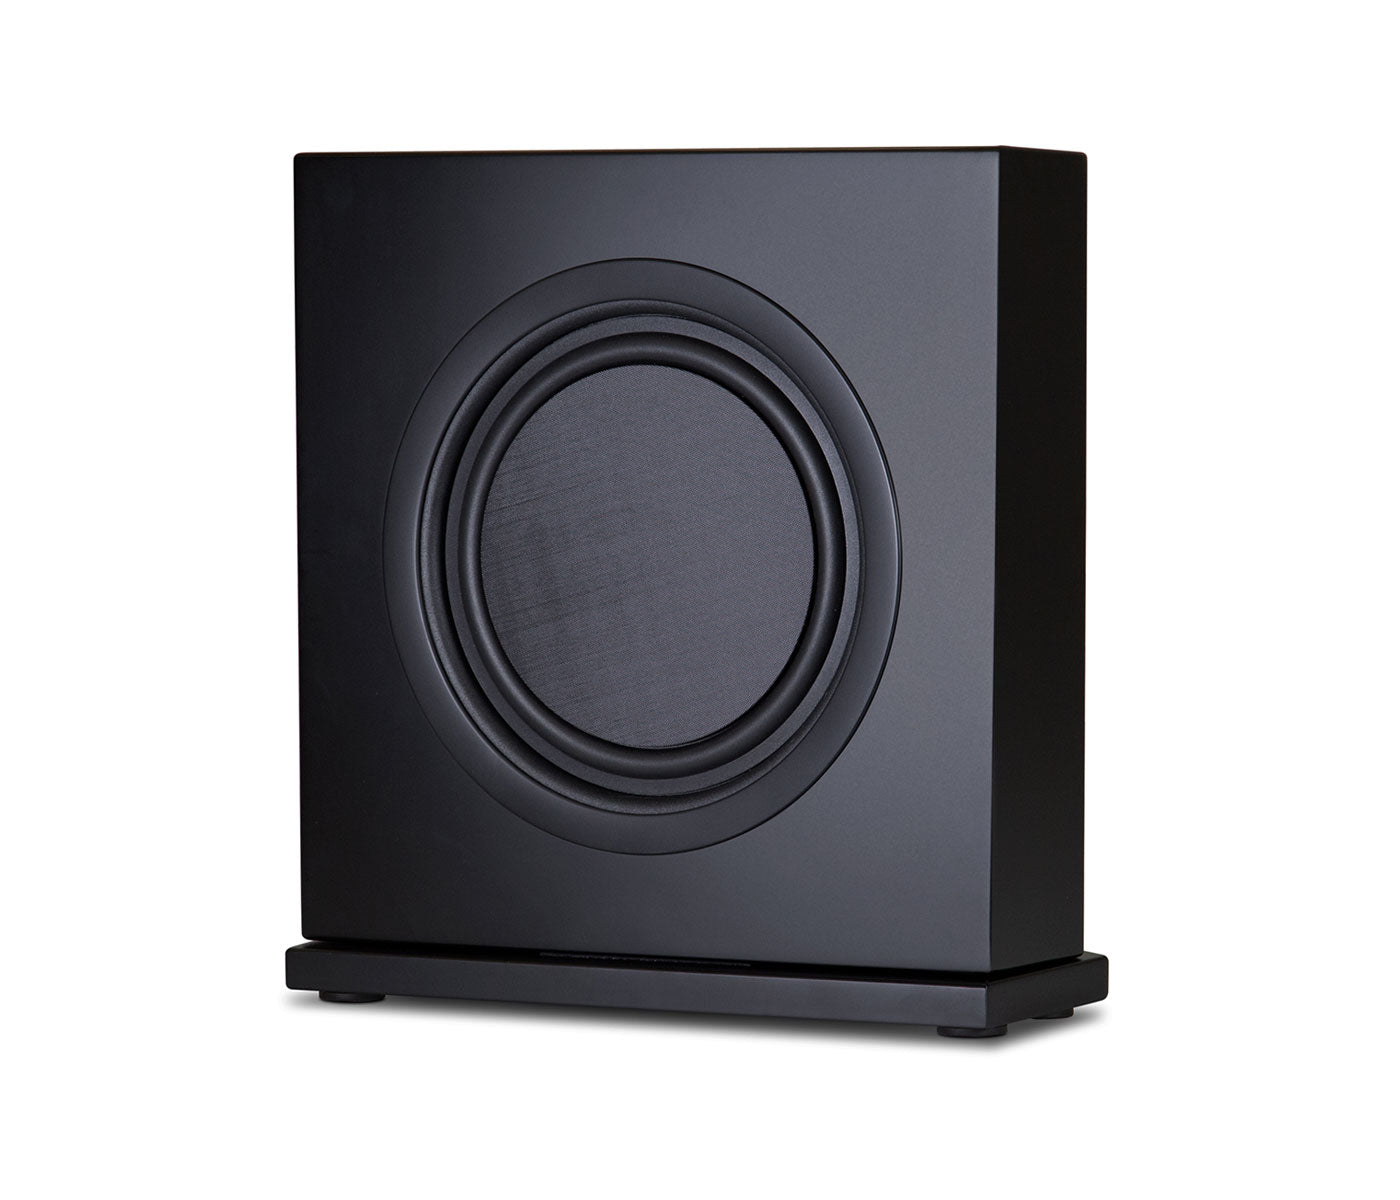 PSB CSIR SUB IN-ROOM SUBWOOFER - PSB Speakers is a Canada's leading manufacturer of top-performing and for high quality Audio Speakers, headphones, loudspeakers, subwoofers, Home Theater Systems, Floorstanding Speakers, Bookshelf Speakers, loudspeakers and more available here at Vinyl Sound.